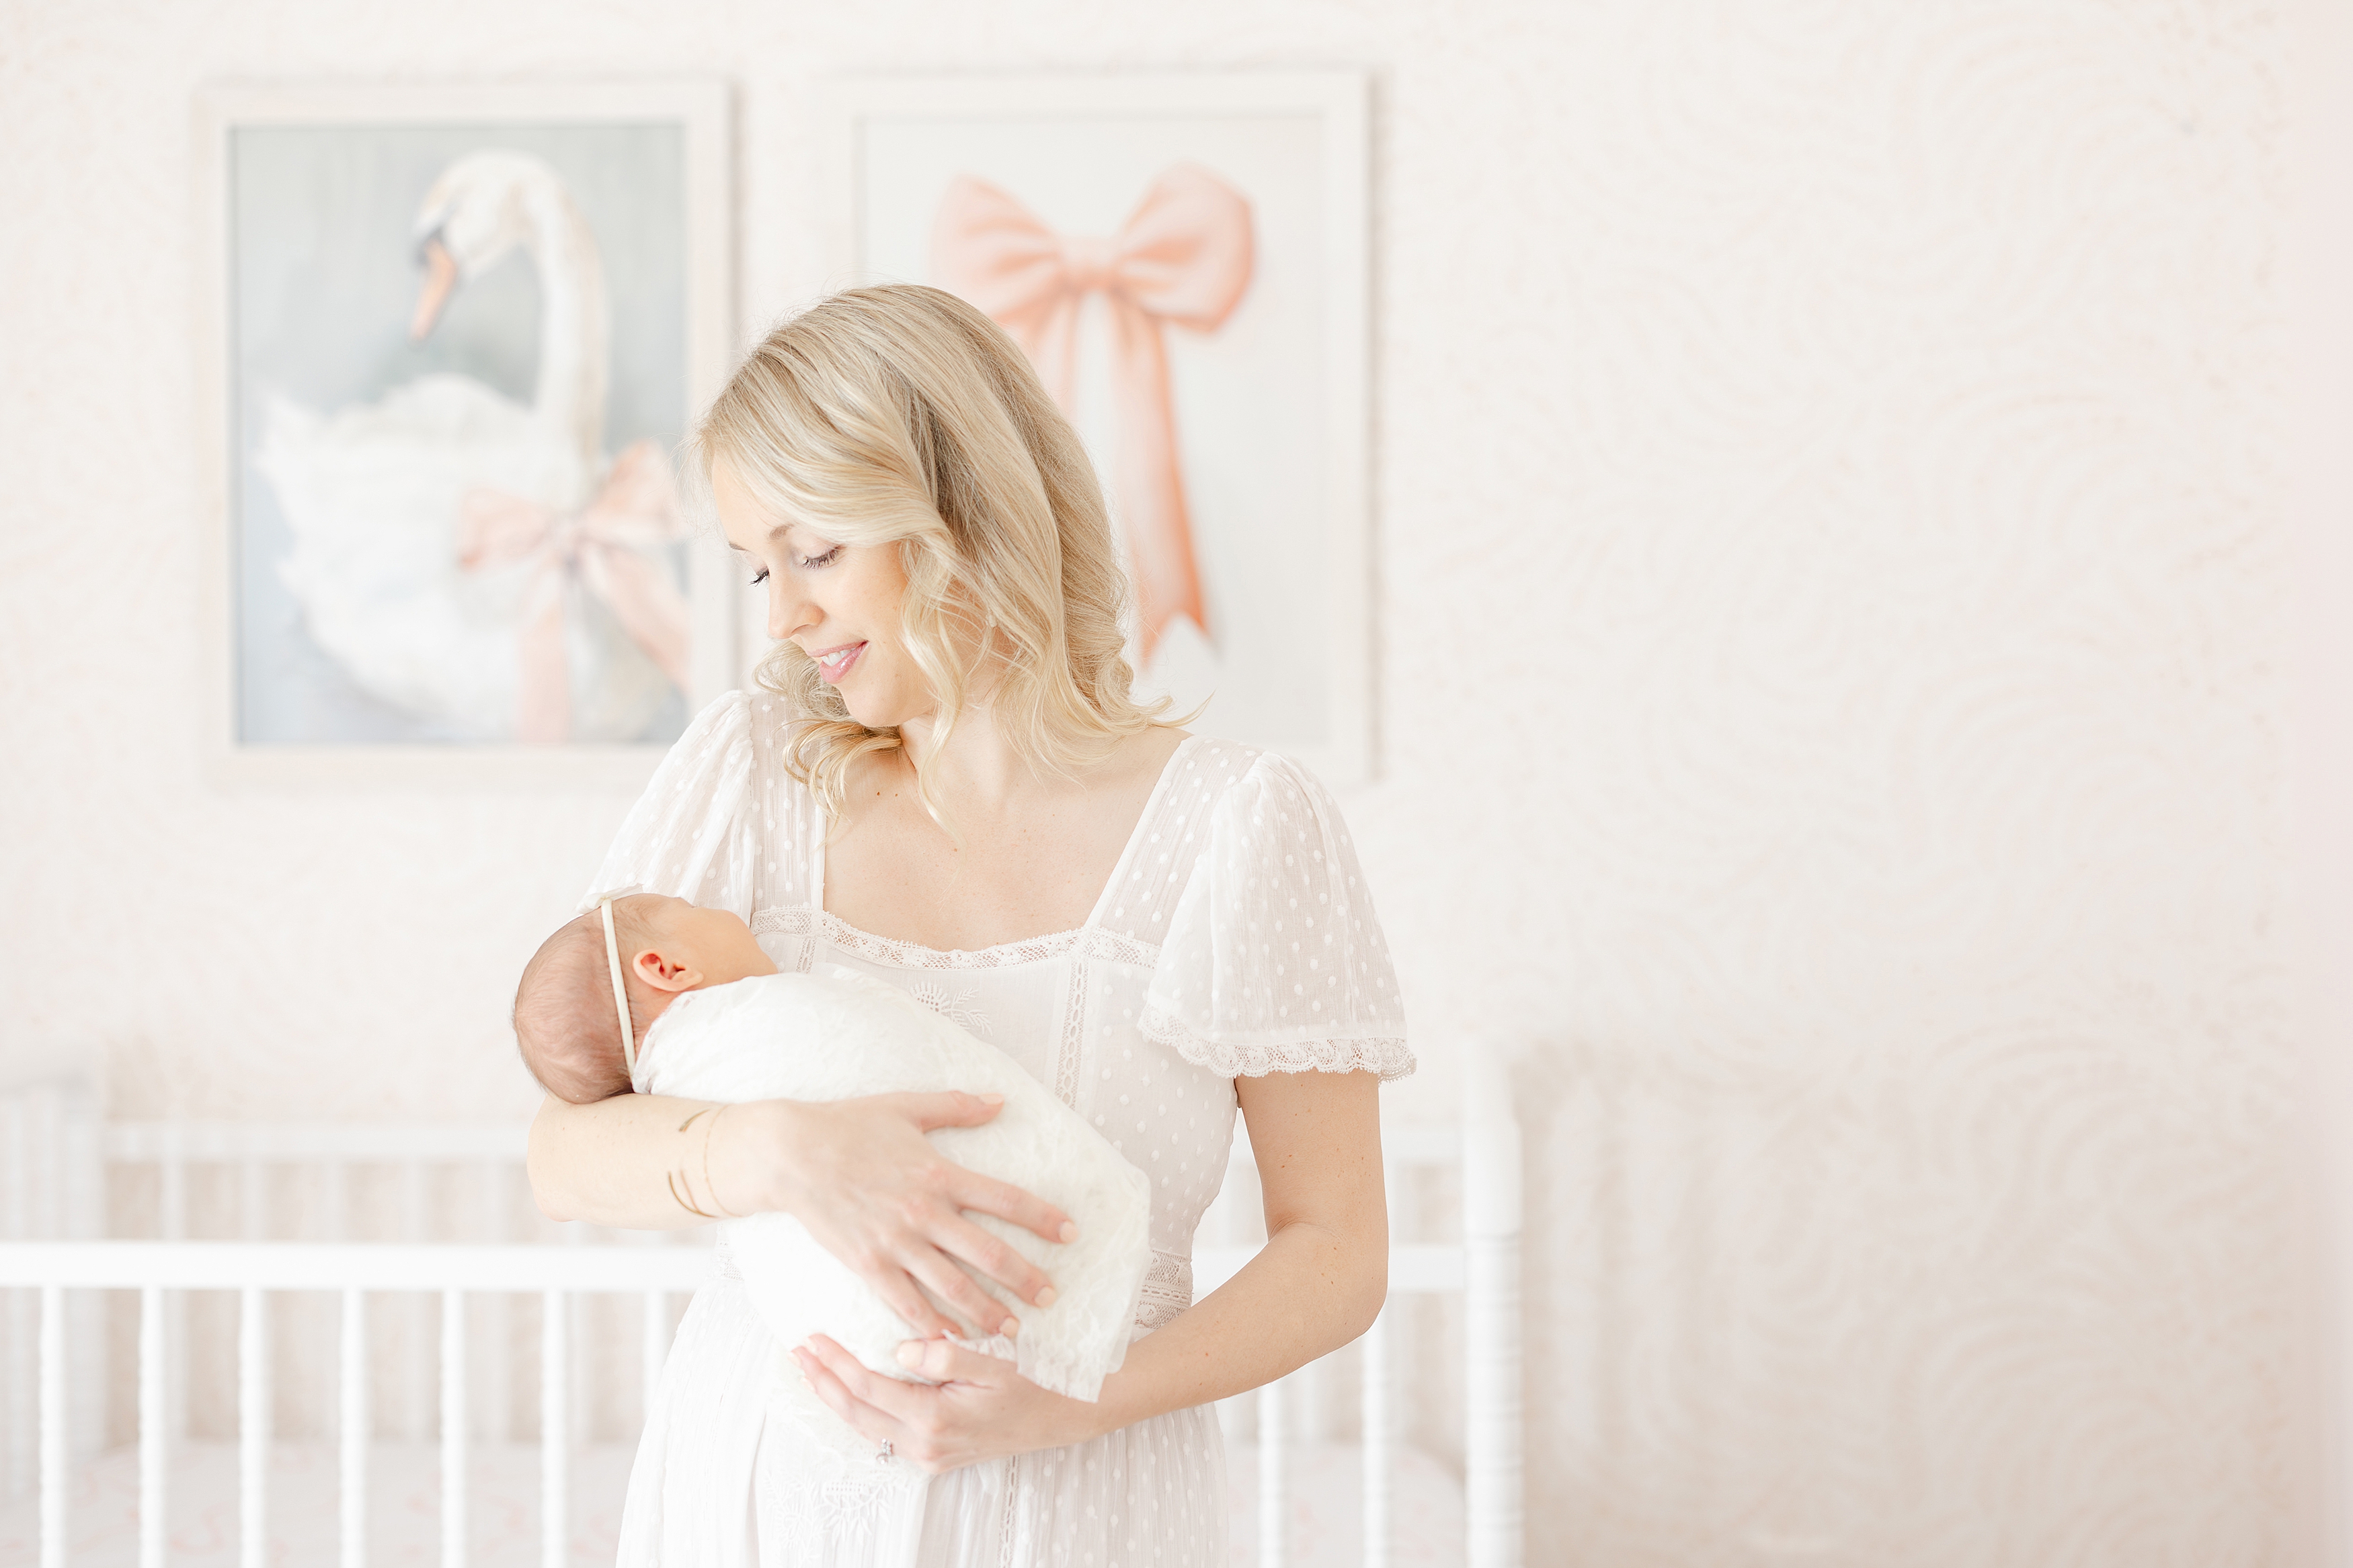 Woman in white lace dress holding a newborn baby gilr in a pink and white nursery.